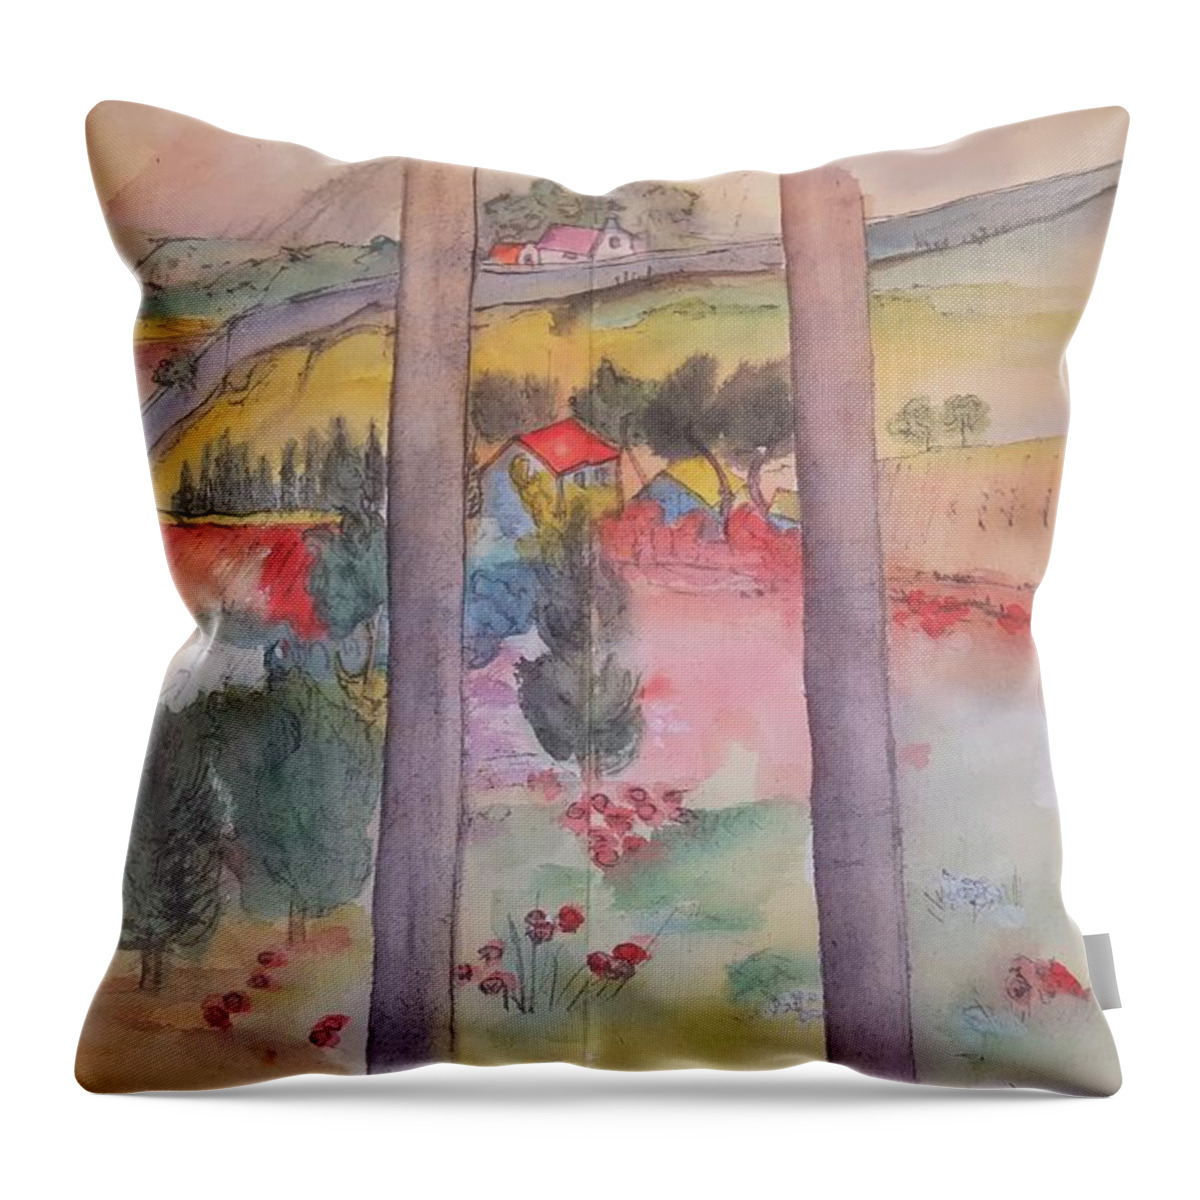 Van Gogh. France. Landscape Throw Pillow featuring the painting Van Gogh's France album by Debbi Saccomanno Chan